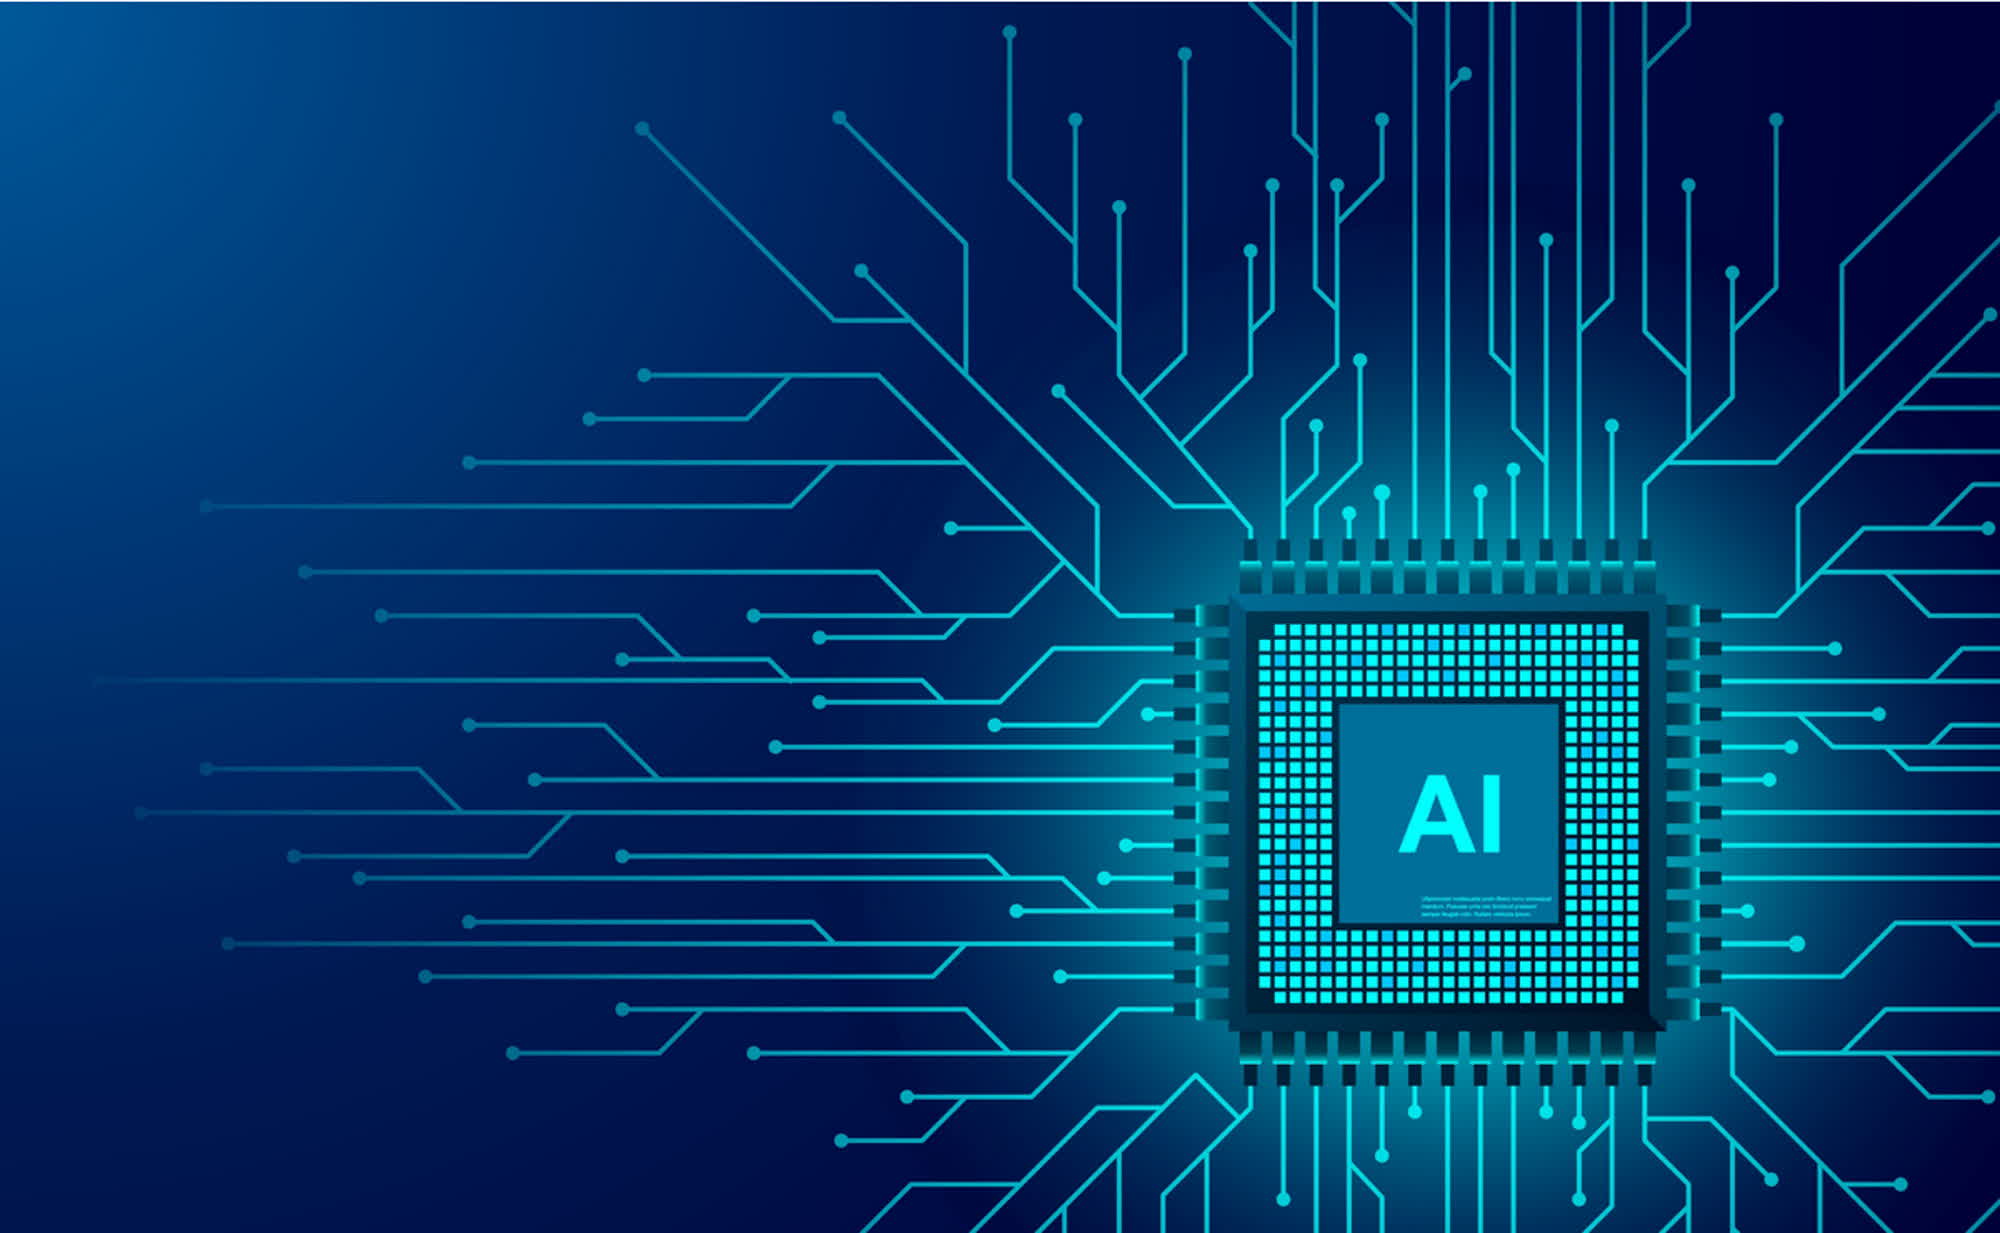 AMD believes AI will be important for all their upcoming products (story correction)